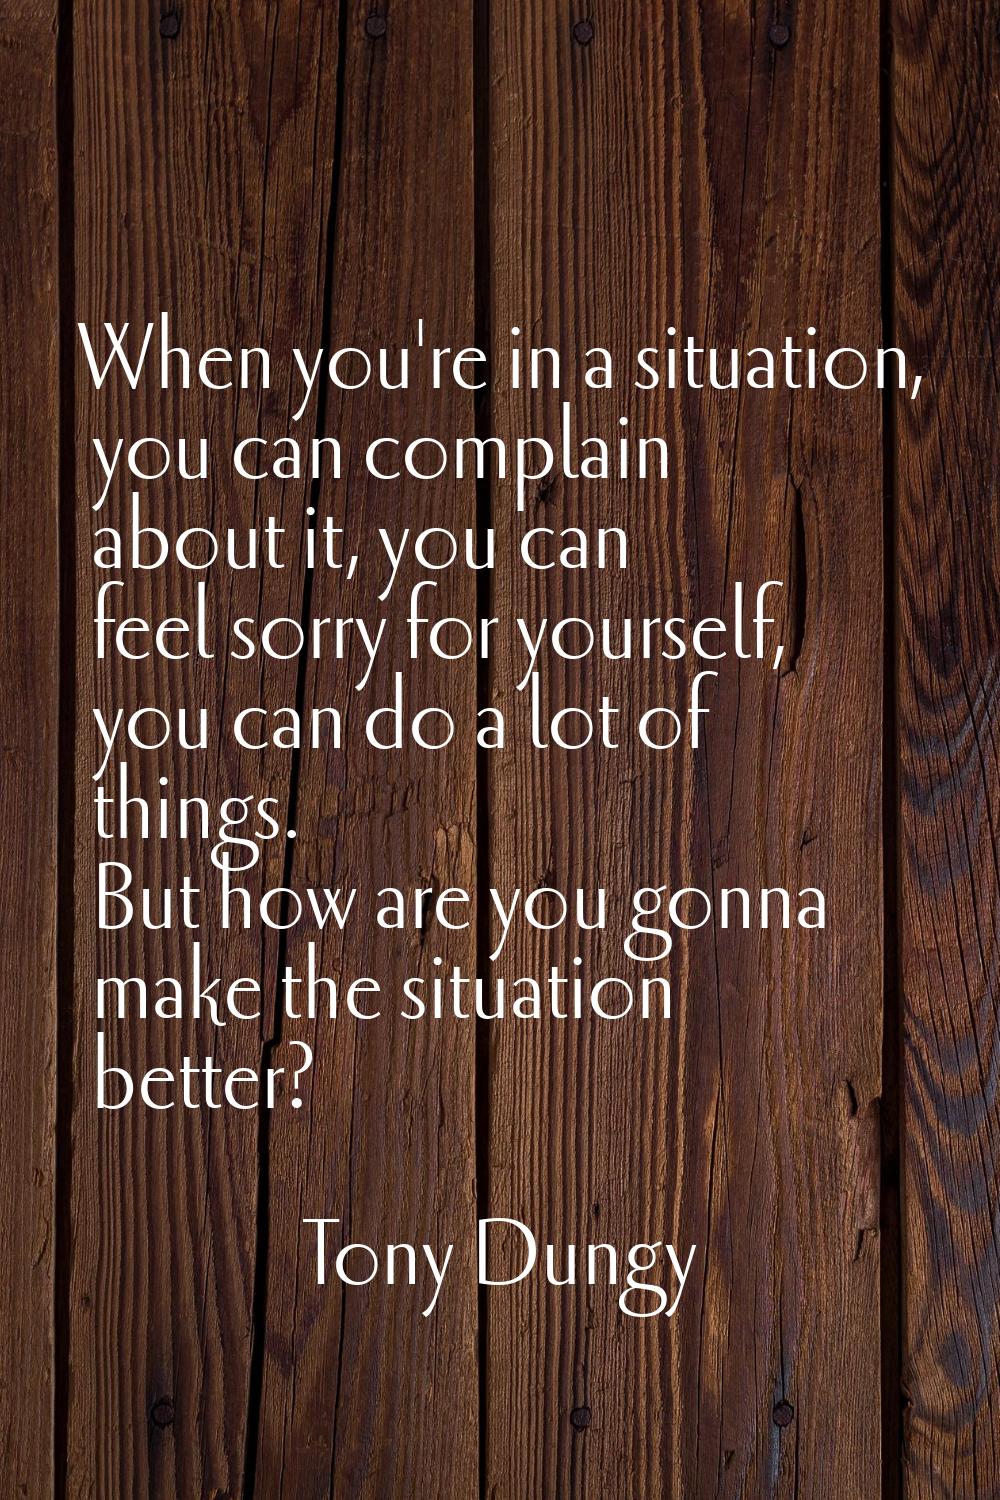 When you're in a situation, you can complain about it, you can feel sorry for yourself, you can do 